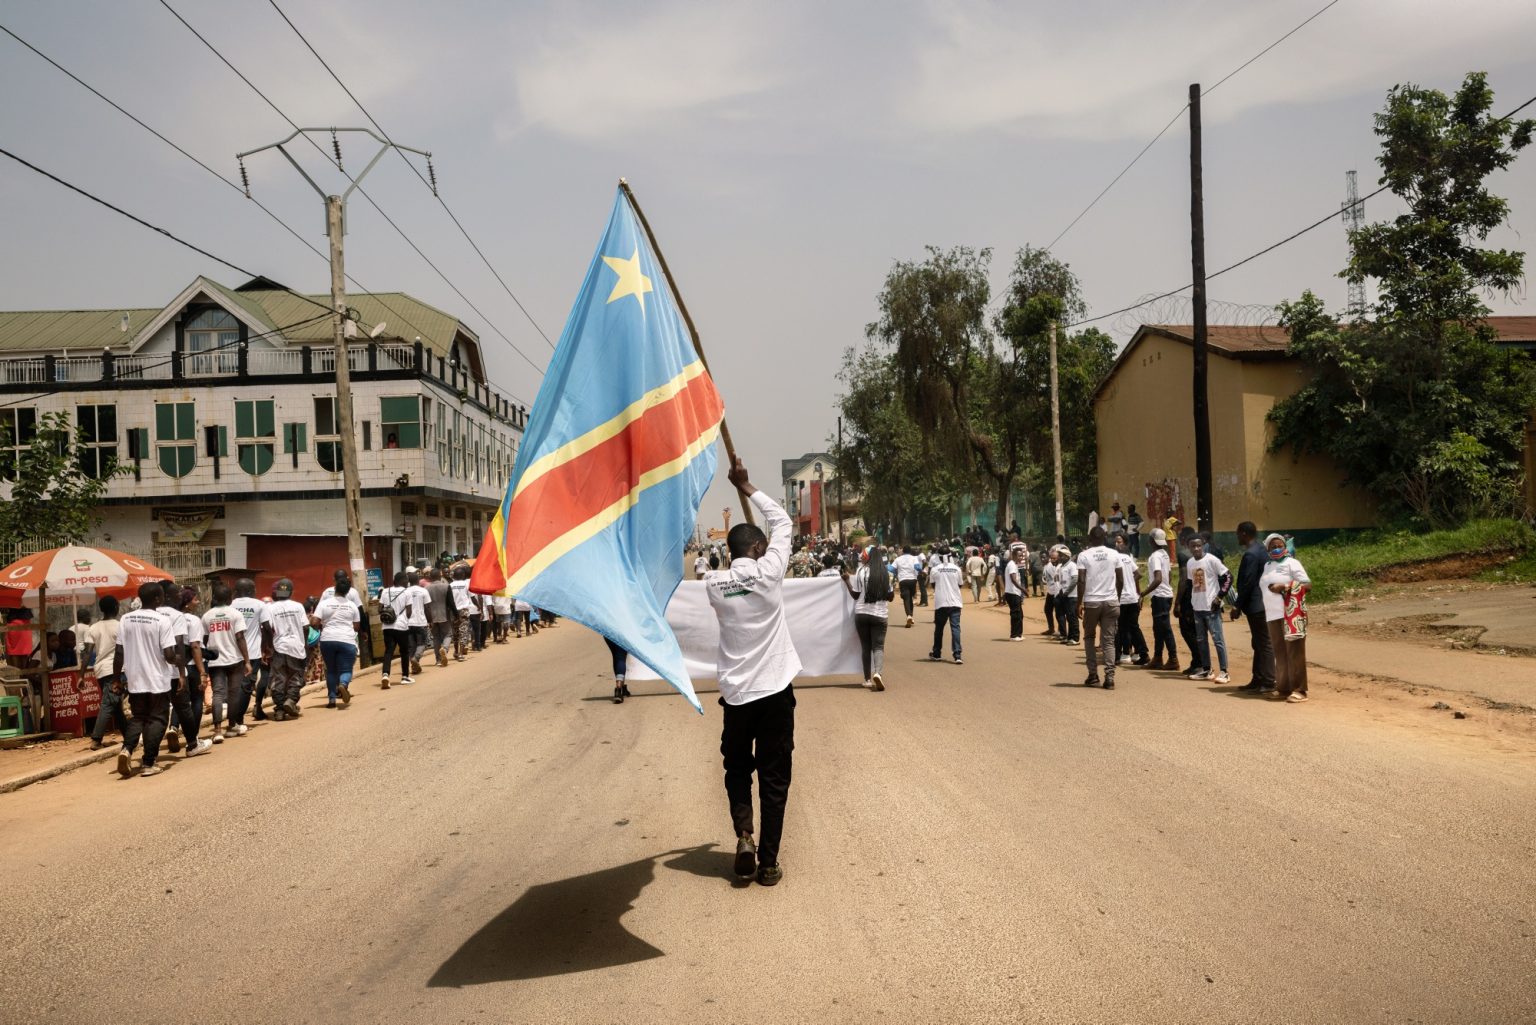 Beni, Democratic Republic of the Congo, January 2022 - January 24, during the protest demonstration against the État de siege in Beni, Ushindi Mumbere, 23 years old, was killed by the police.
The young man was member of youth non-party and non-violent movement L.U.C.H.A, that vindicates more rights for the population and the end of état de siege. On Saturday 29 of January, during the funeral, most of the population of Beni overflew the roads for a last goodbye to the young man, and to protest against military powers of MONUSCO. ><
Beni, Repubblica Democratica del Congo, gennaio 2022 - Il 24 gennaio durante delle manifestazioni di protesta contro l état de siège, a Beni, è stato ucciso dalla polizia Ushindi Mumbere, di 23 anni. Il ragazzo, membro del movimento giovanile apartitico e non-violento L.U.C.H.A. che rivendica maggiori diritti per la popolazione e la revoca dello état de siège. Sabato 29 gennaio durante i funerali gran parte della popolazione di Beni si è riversata per le strade per un ultimo saluto al ragazzo e per protestare contro il potere dei militari della MONUSCO.